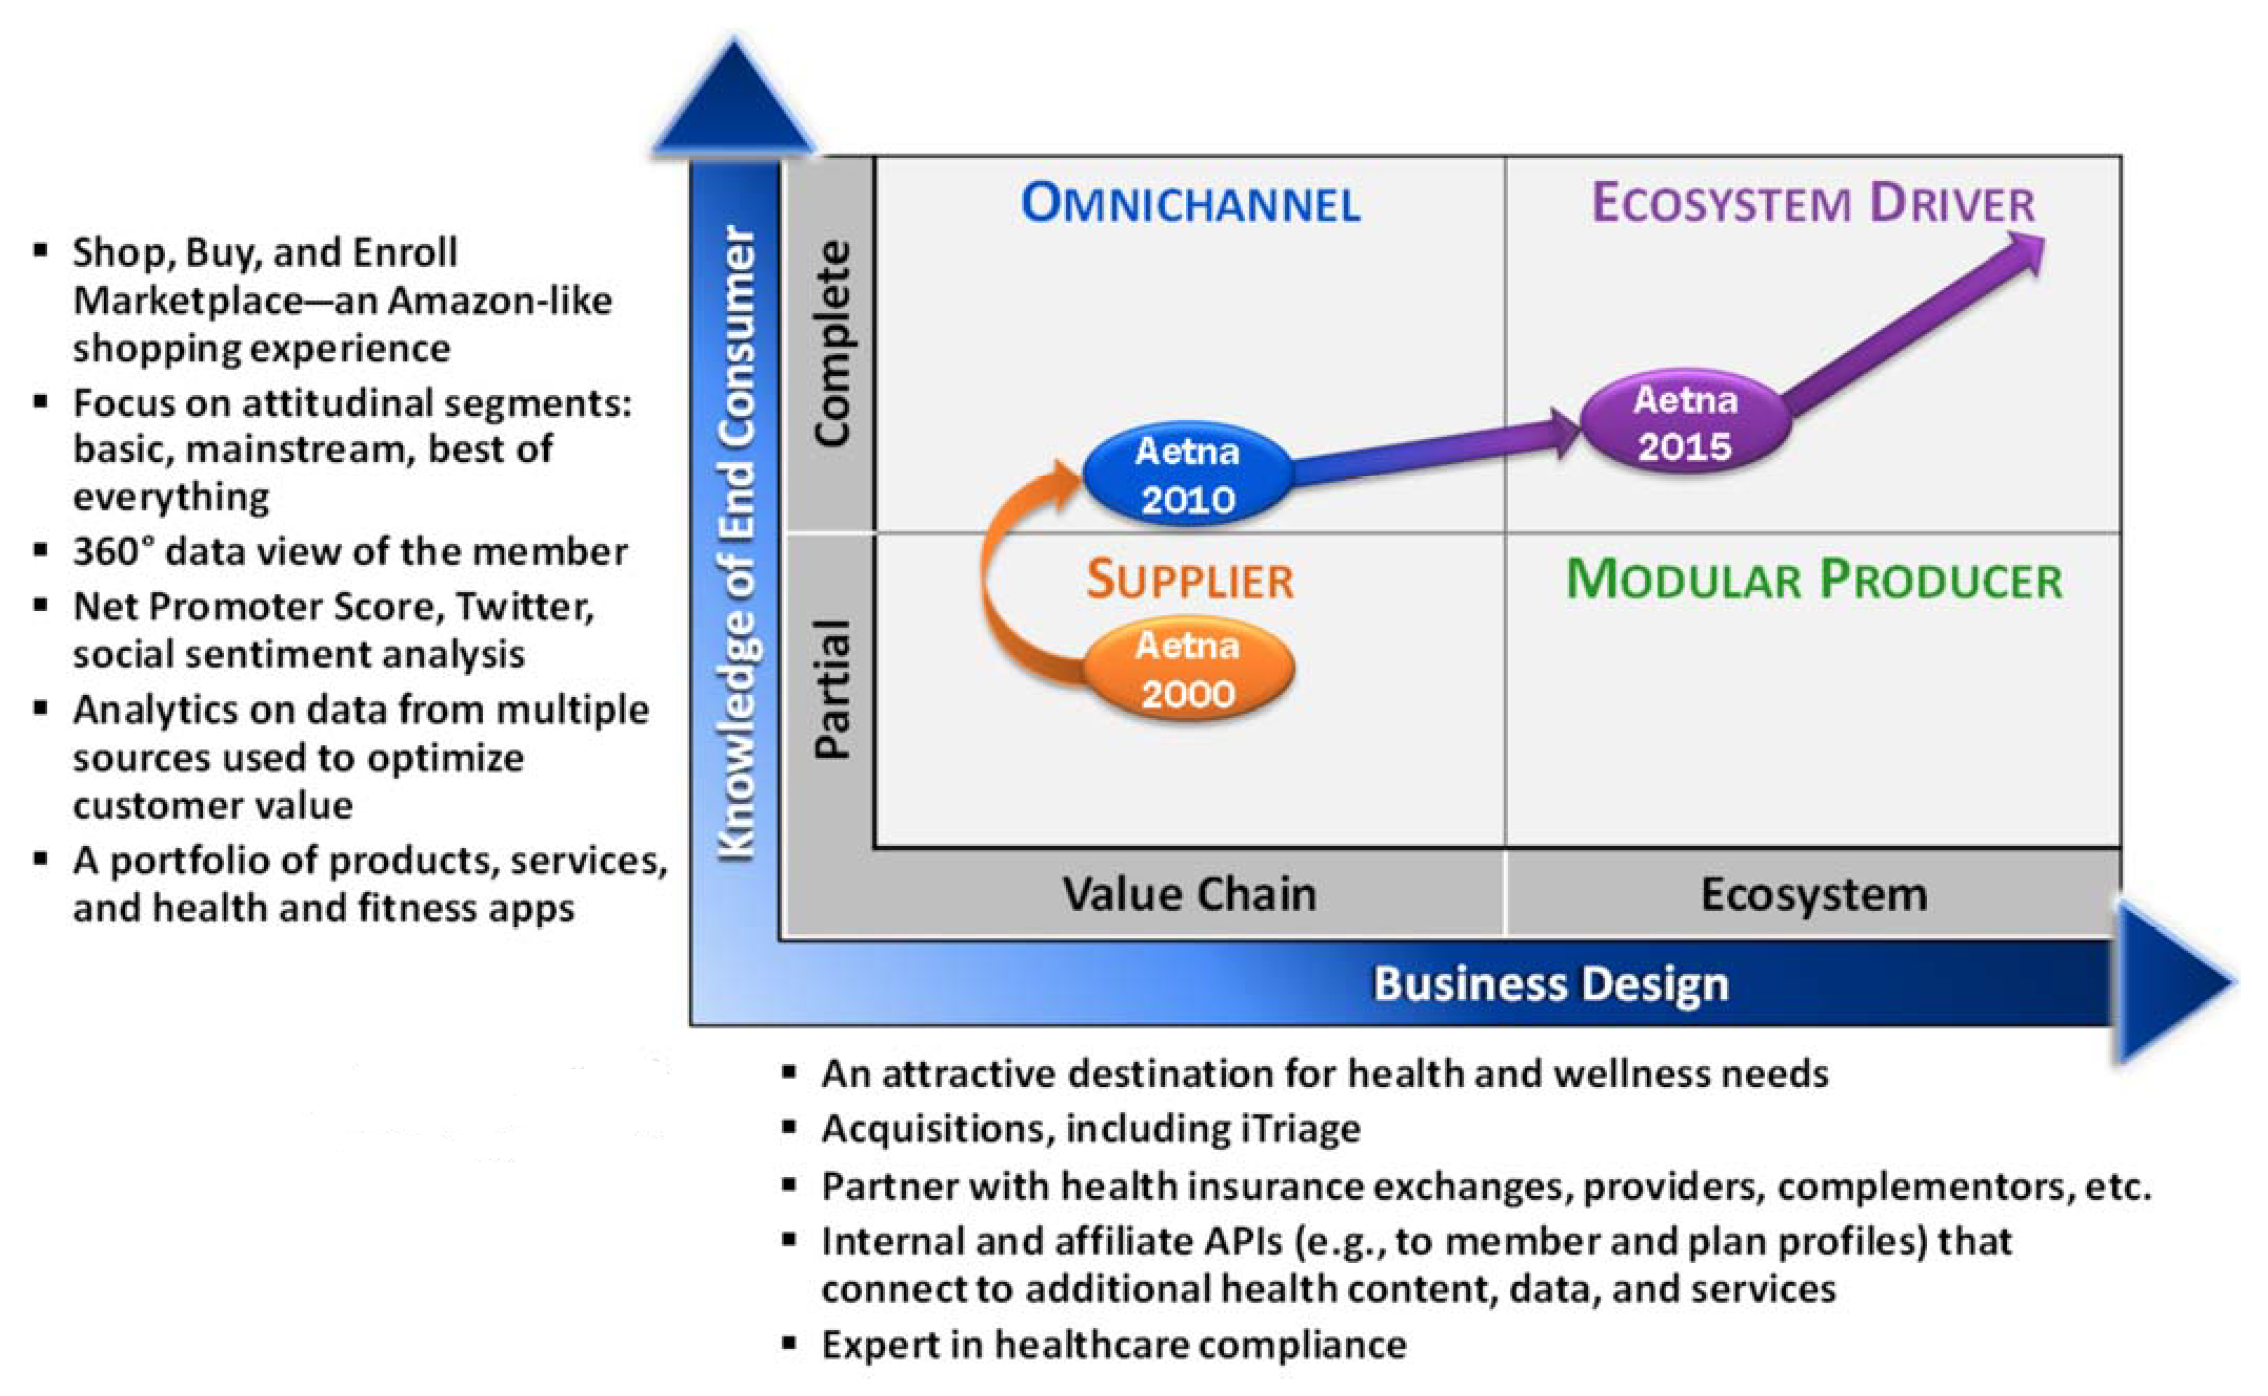 Figure 2: Aetna—Becoming an Ecosystem Driver